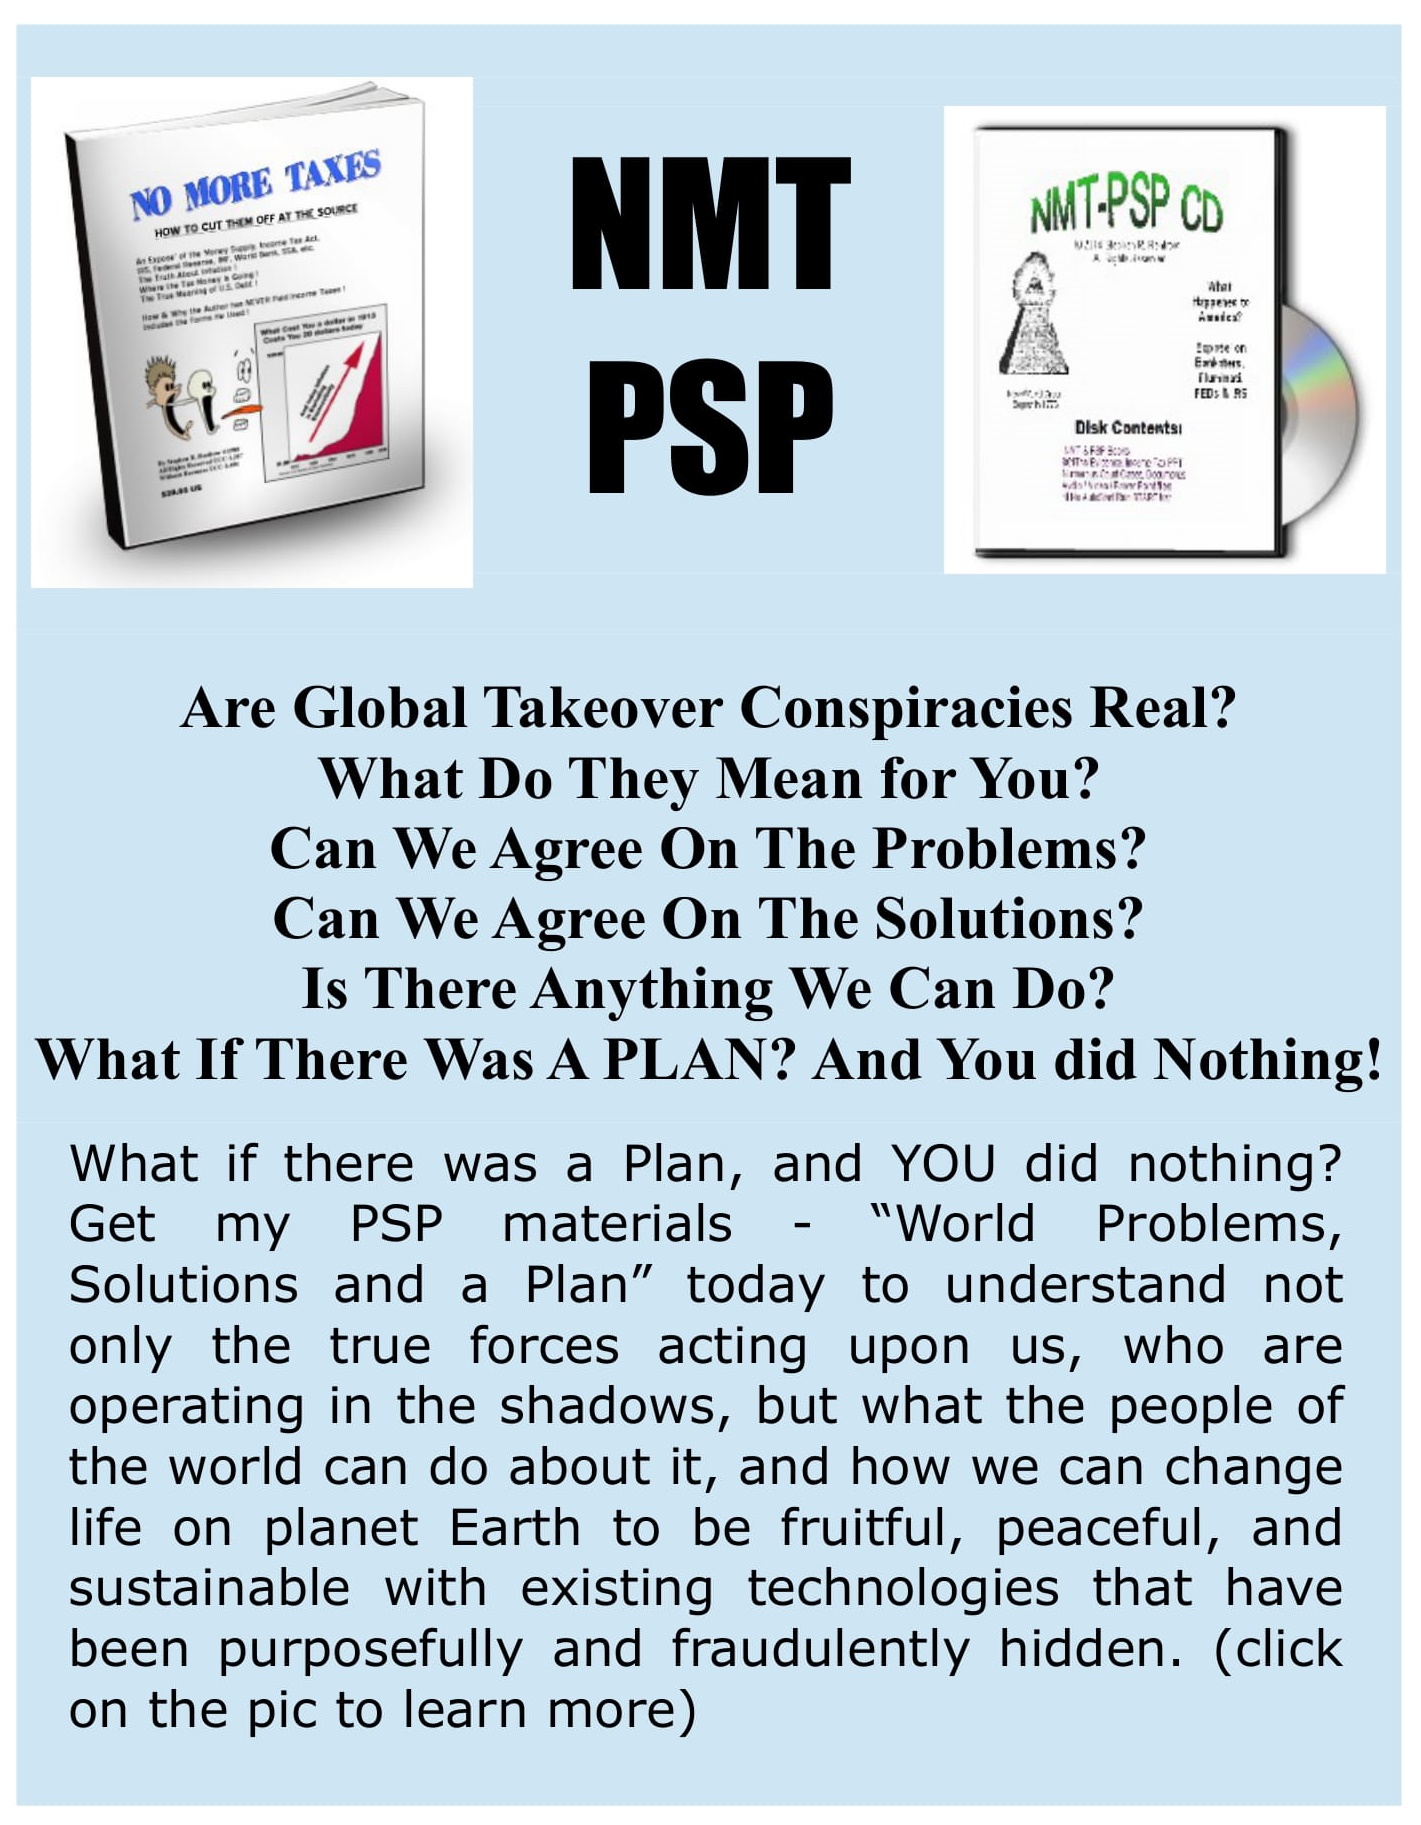 Author of NMT and PSP books